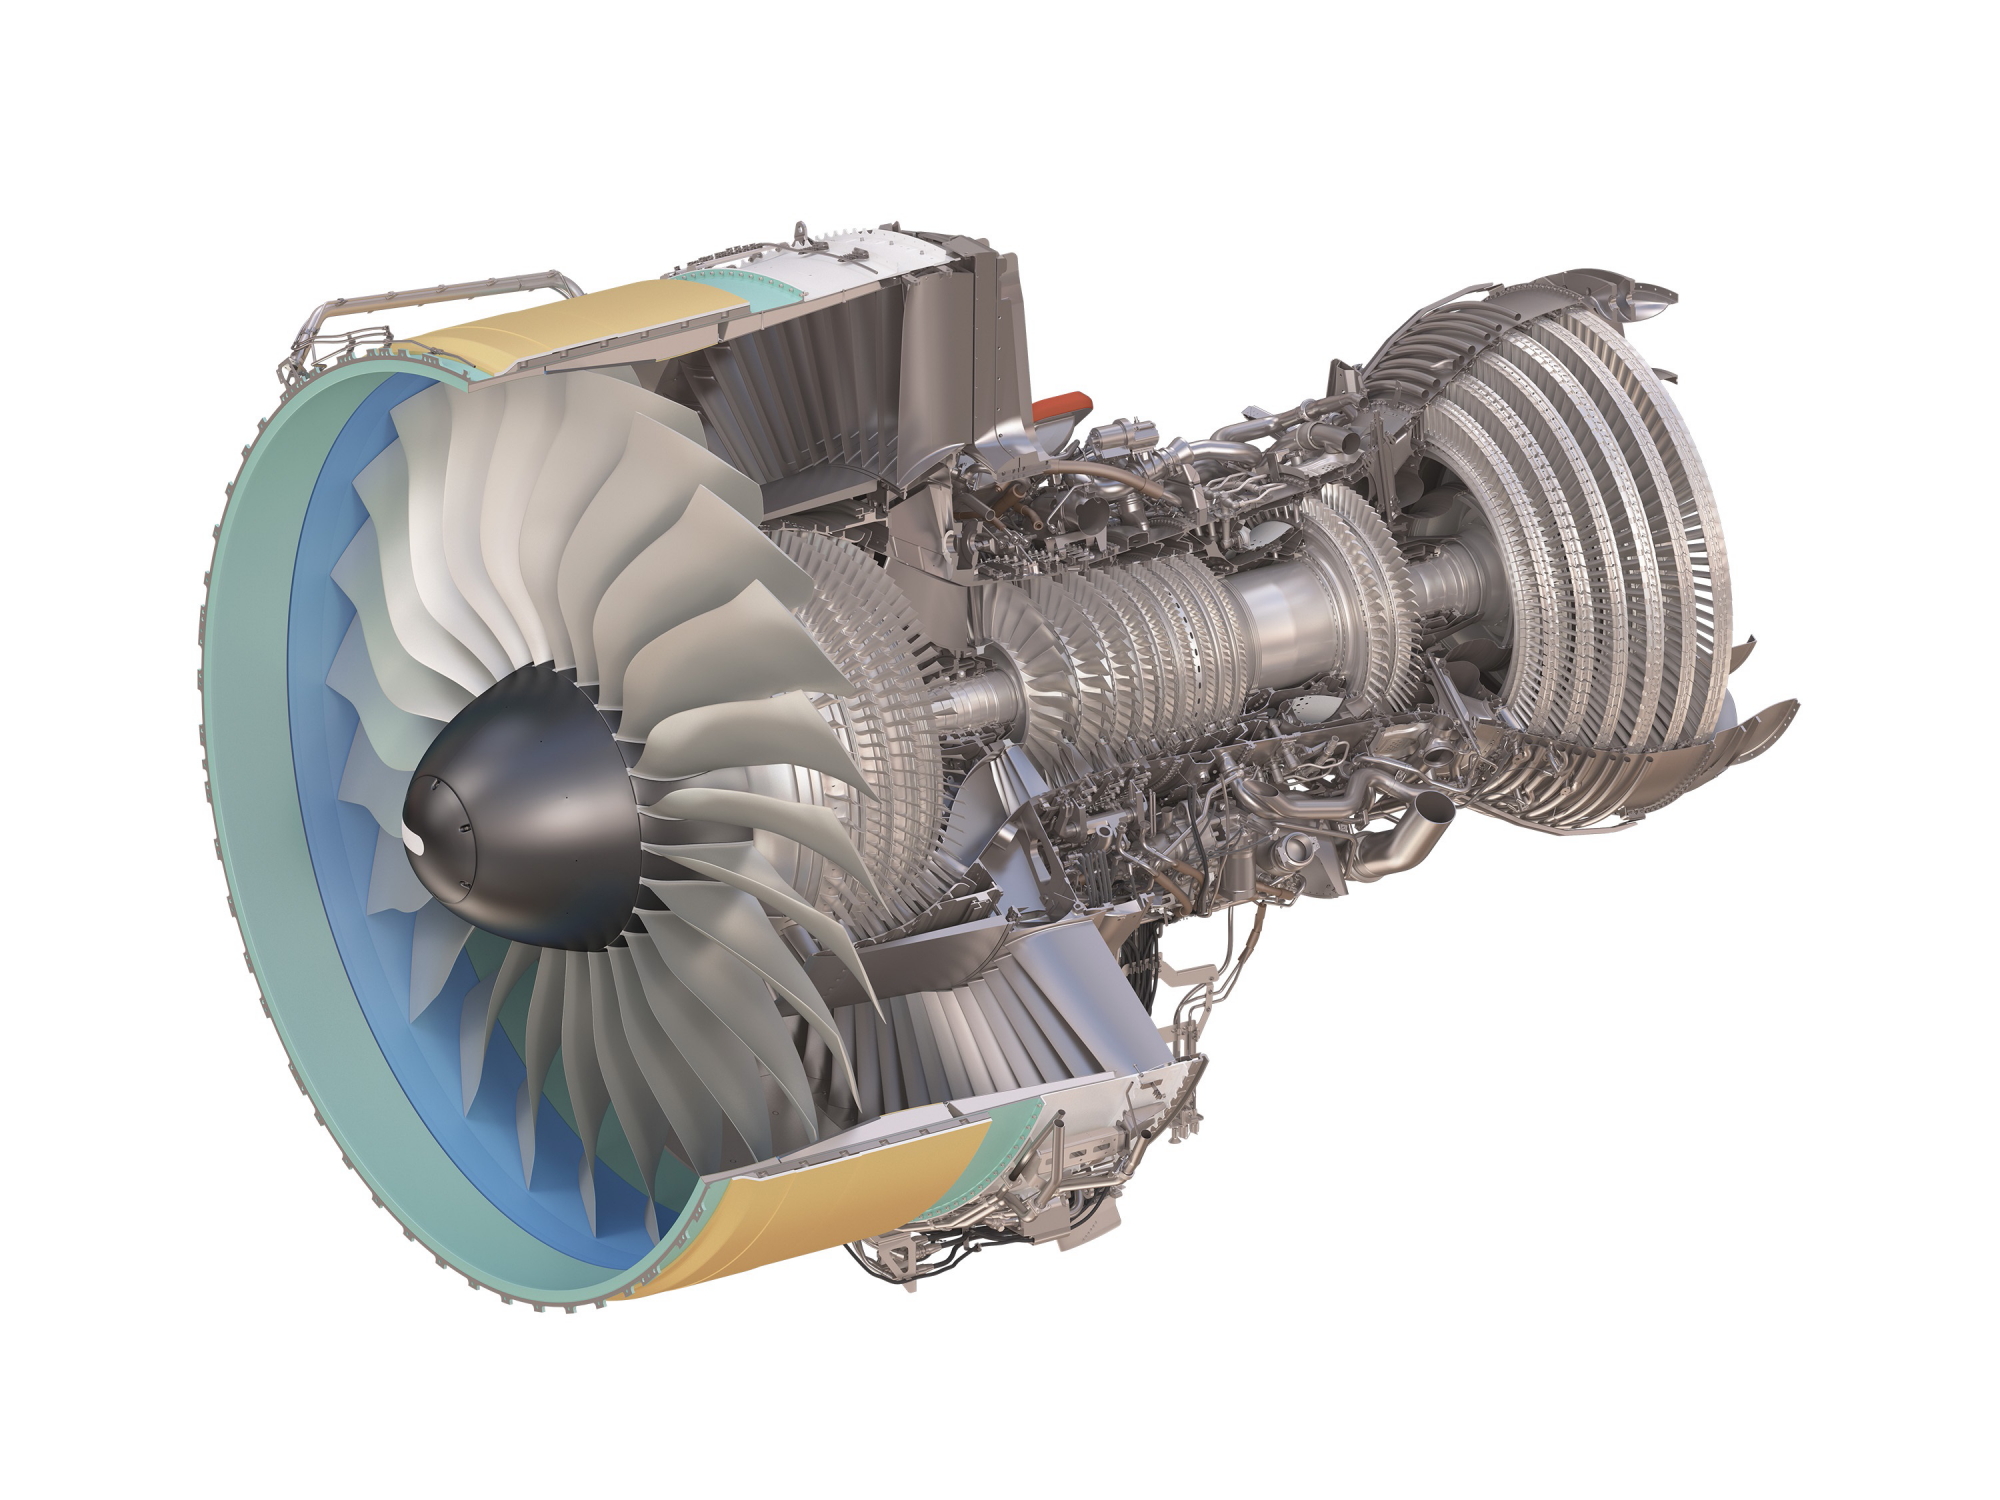 Engine Alliance has inaugurated full engine maintenance, repair and overhaul (MRO) work at Pratt & Whitney Eagle Services Asia in Singapore. The first GP7200 is expected to be inducted at the facility later in the quarter once compliance testing is completed. Click to enlarge.